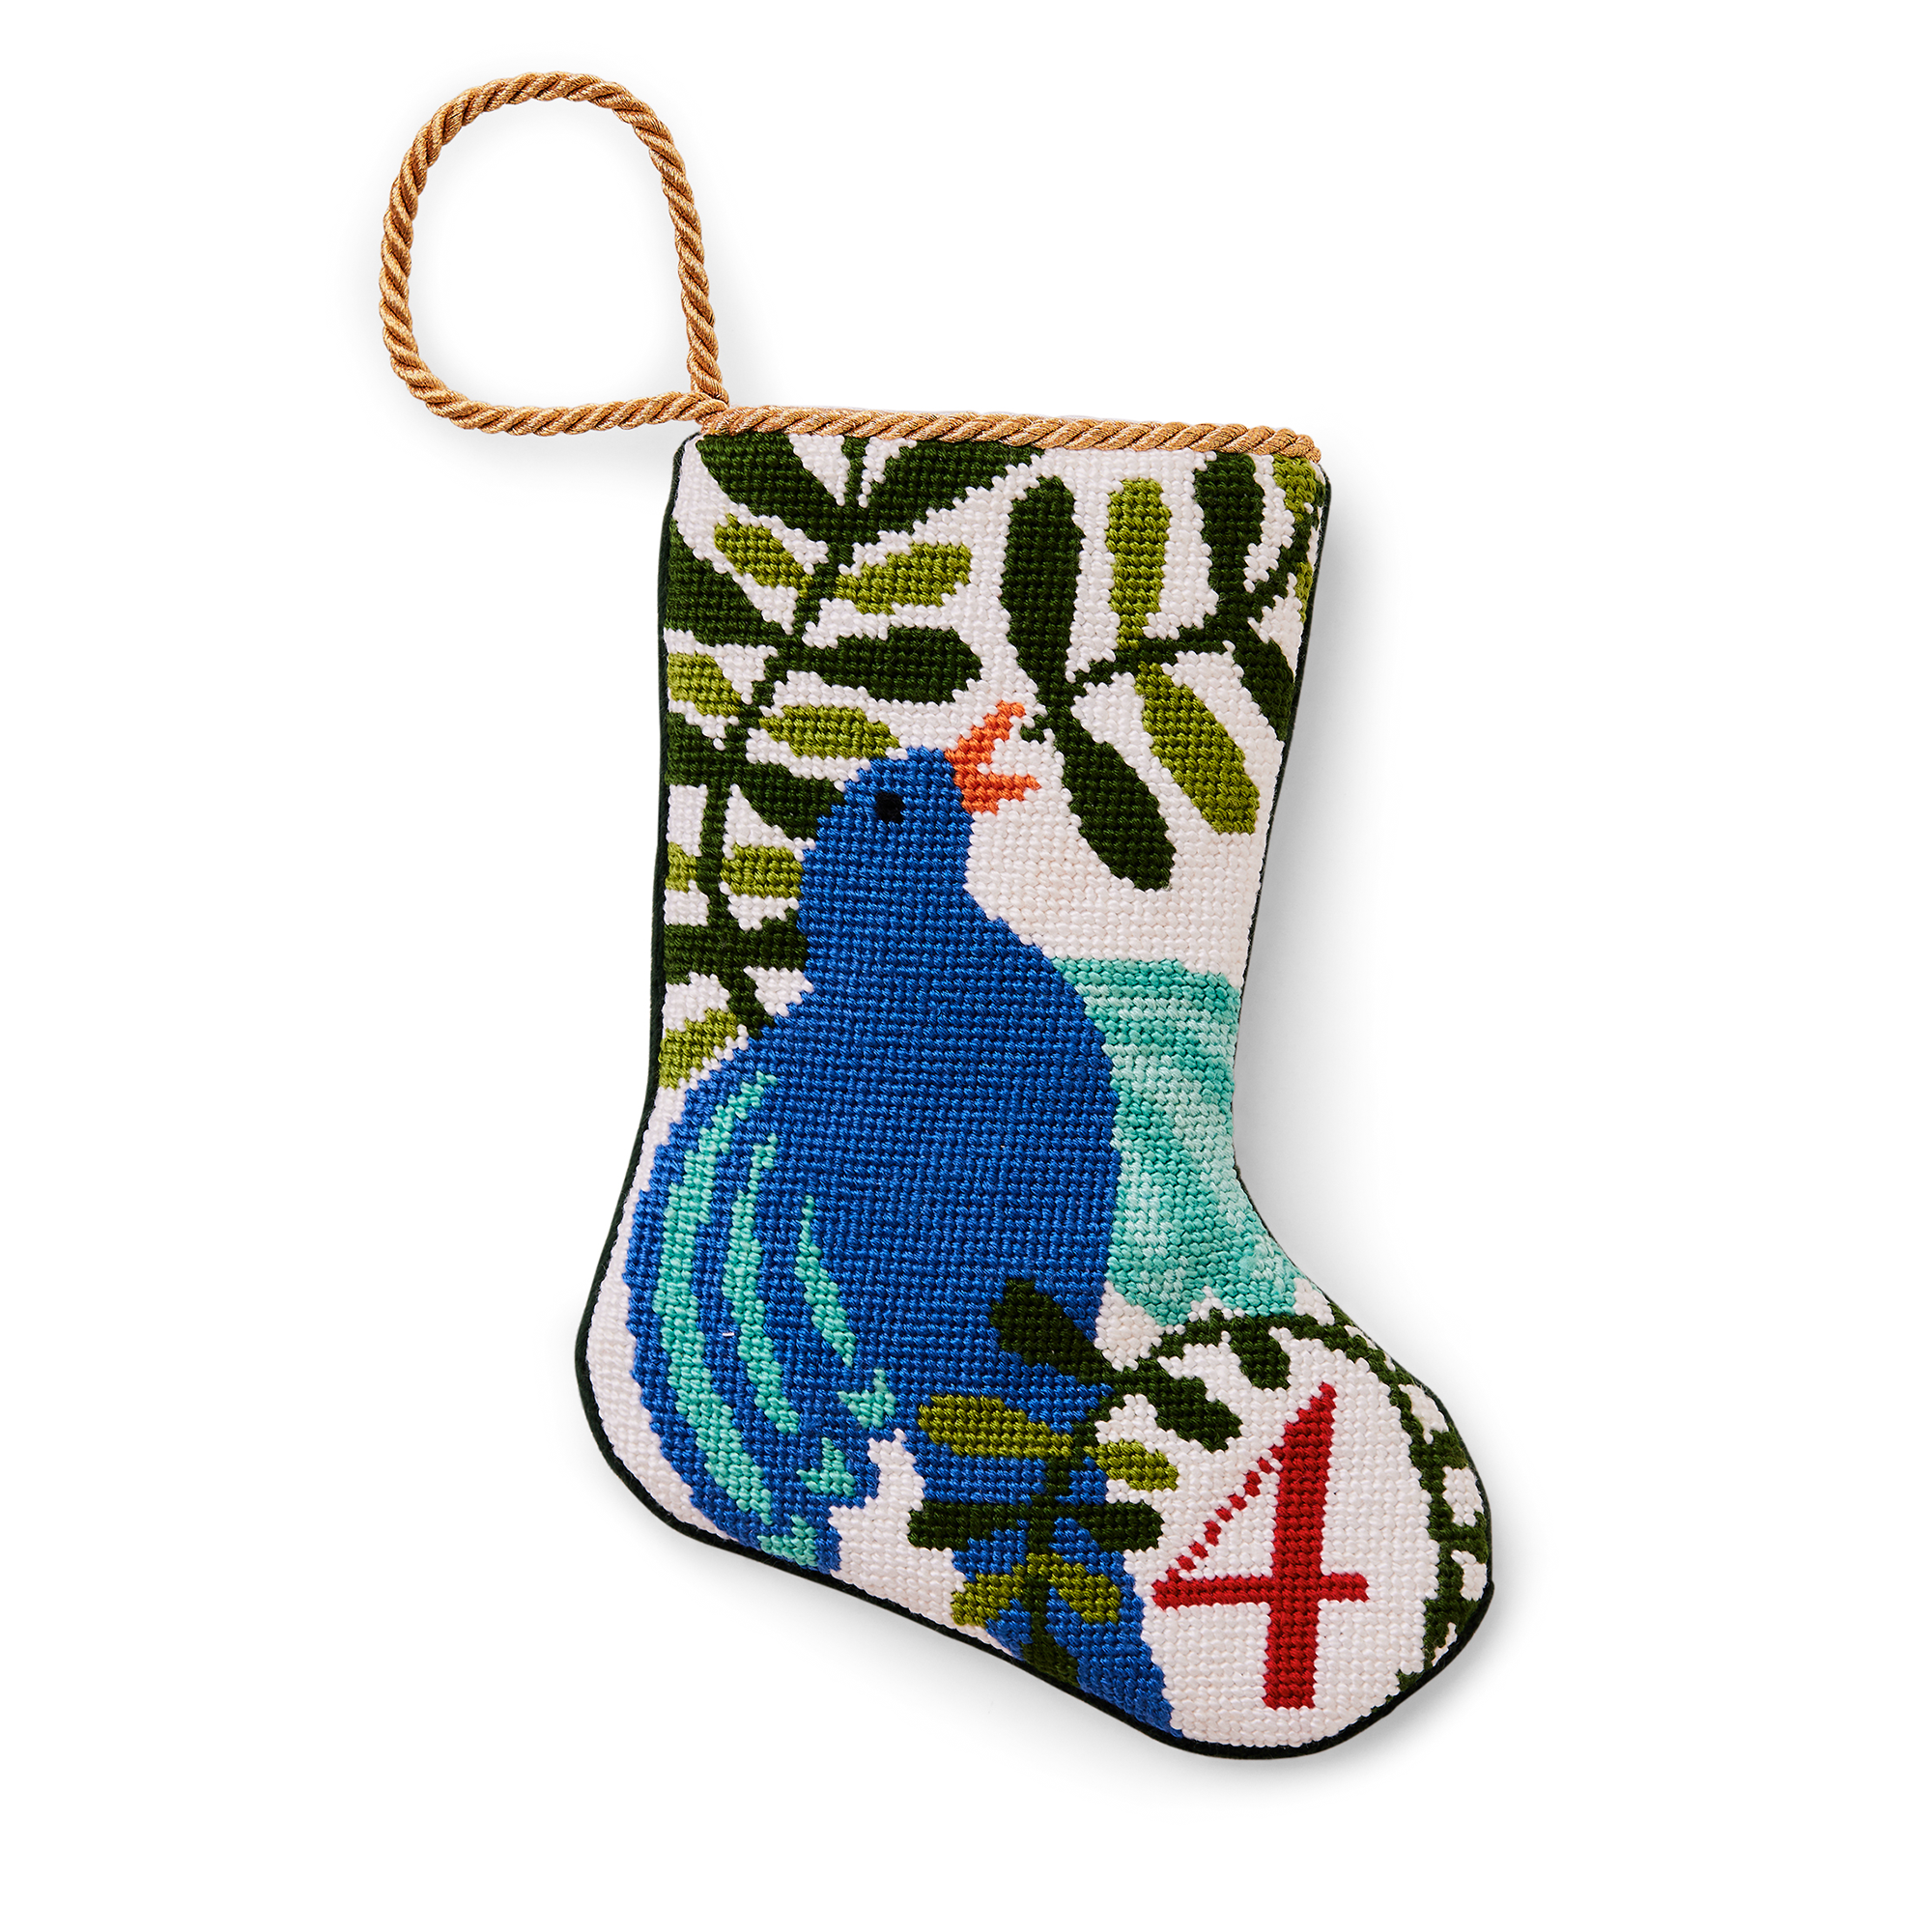 An intricately designed mini needlepoint stocking featuring the '4 Calling Birds' from the classic Christmas carol. This festive decoration adds a traditional and charming touch to your holiday decor. Perfect as tree ornaments, place settings, or for holding special gifts.